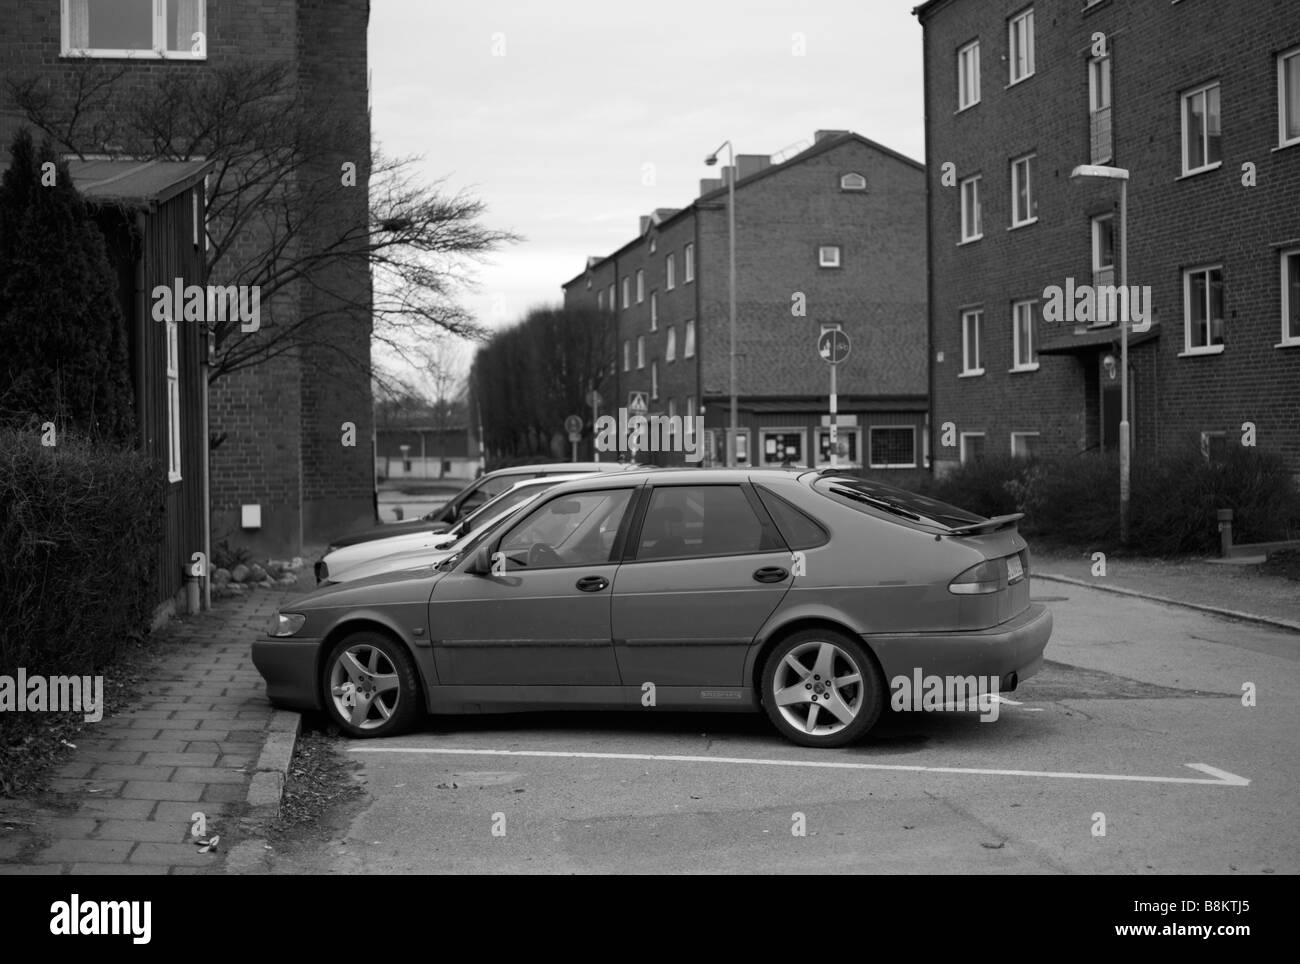 Parked SAAB 9-3 in Helsingborg, Sweden. Picture taken during their big crisis in February 2009. FOR EDITORIAL USE ONLY. Stock Photo